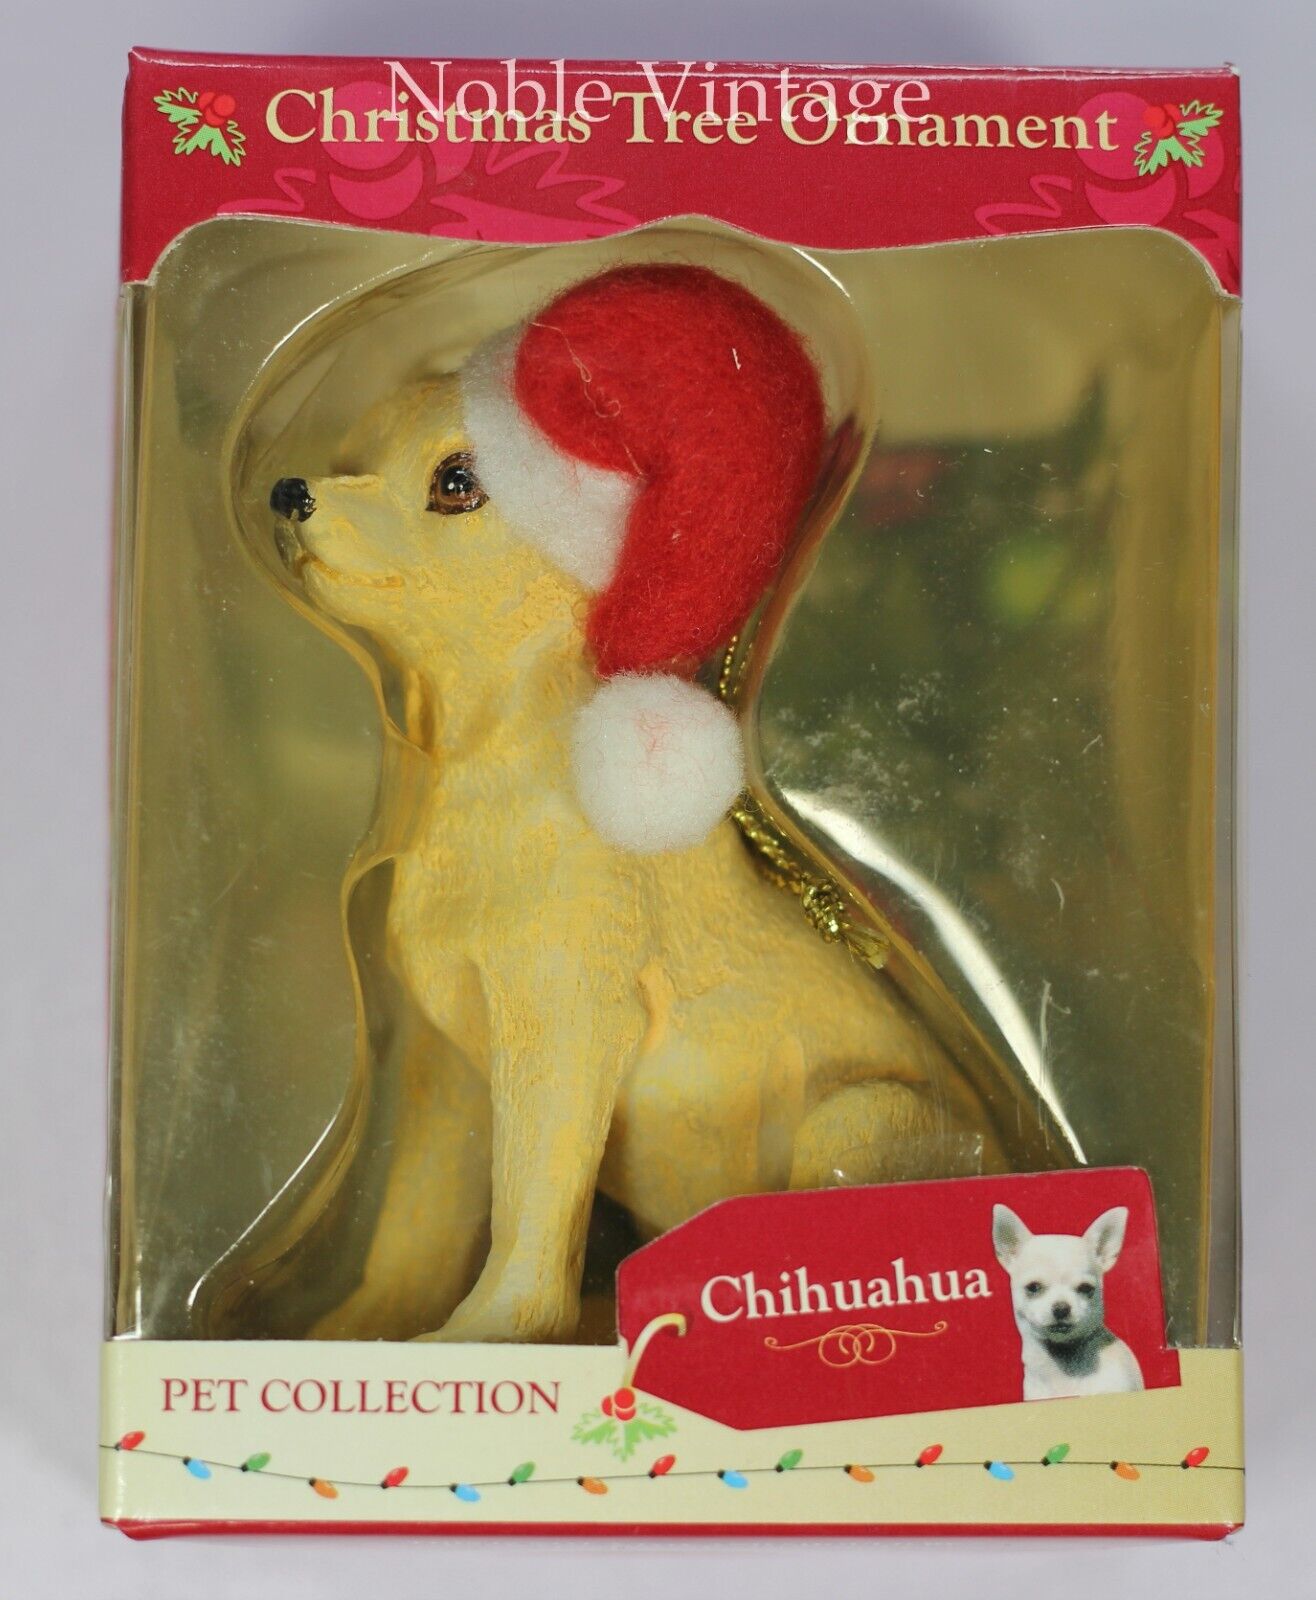 ACA Chihuahua Christmas Tree Ornament - Limited Edition Pet Collection II - 1E2